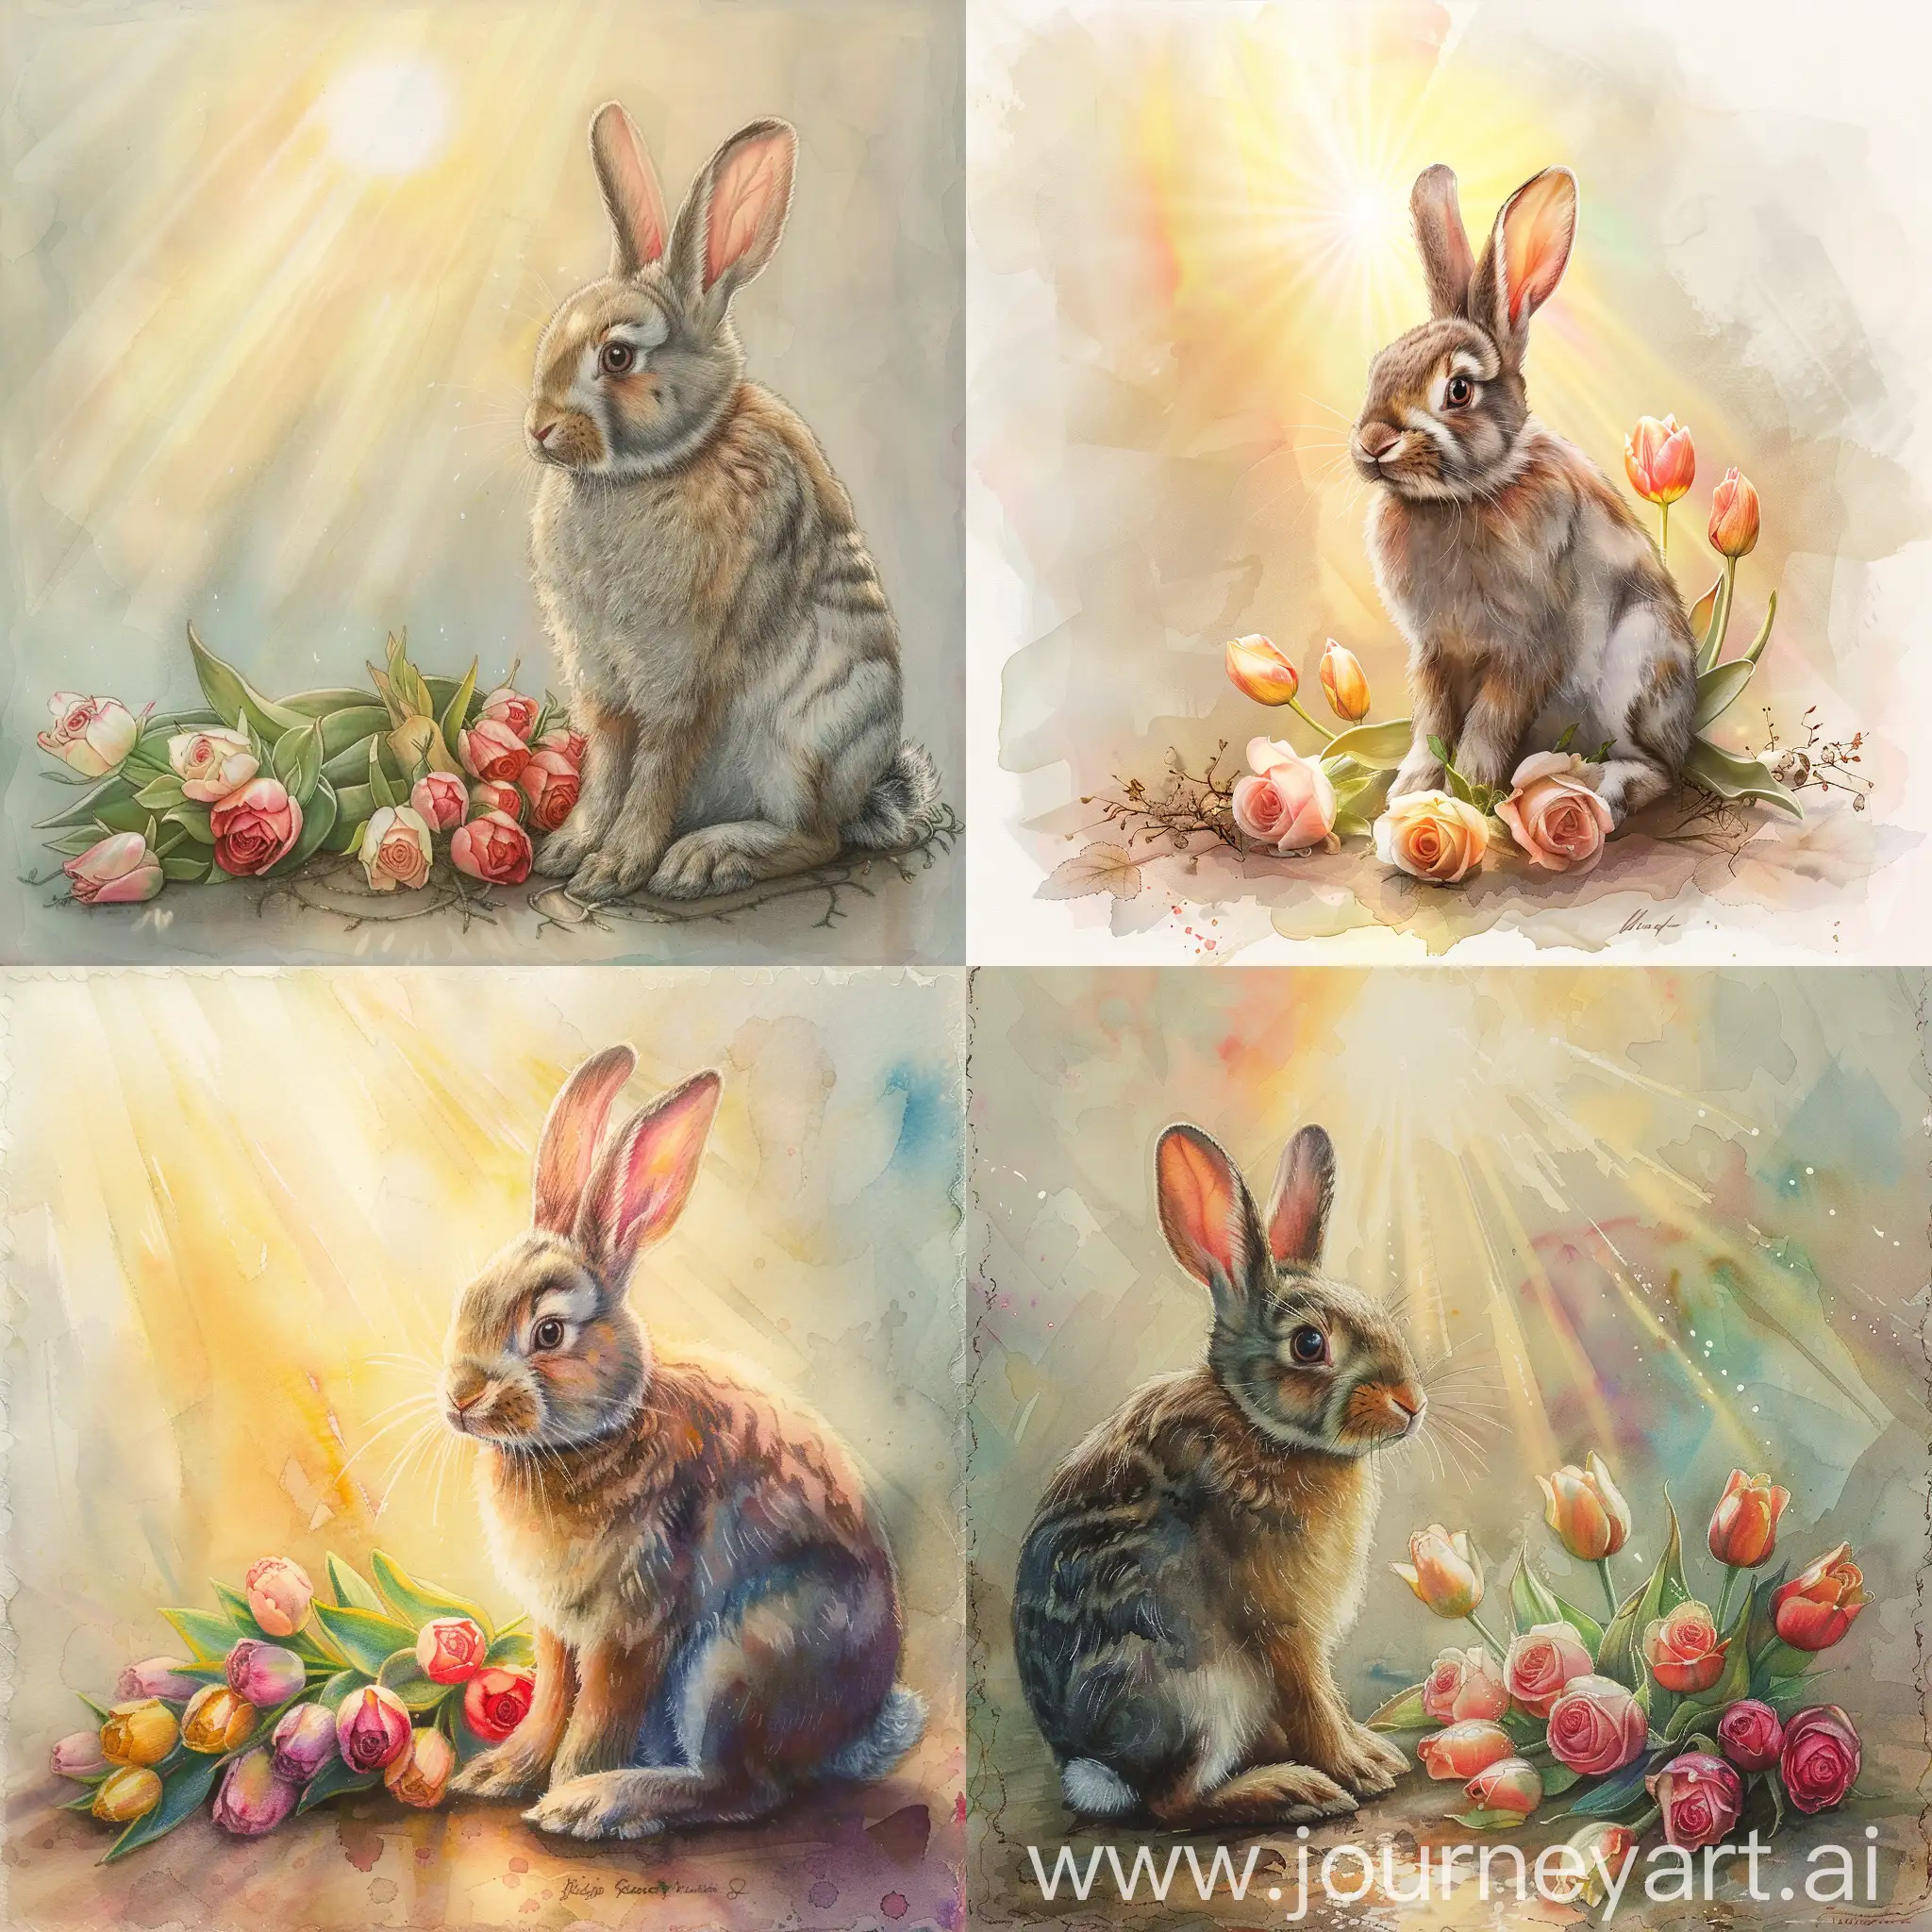 Serene-Rabbit-Amidst-Roses-and-Tulips-in-Watercolor-Glow